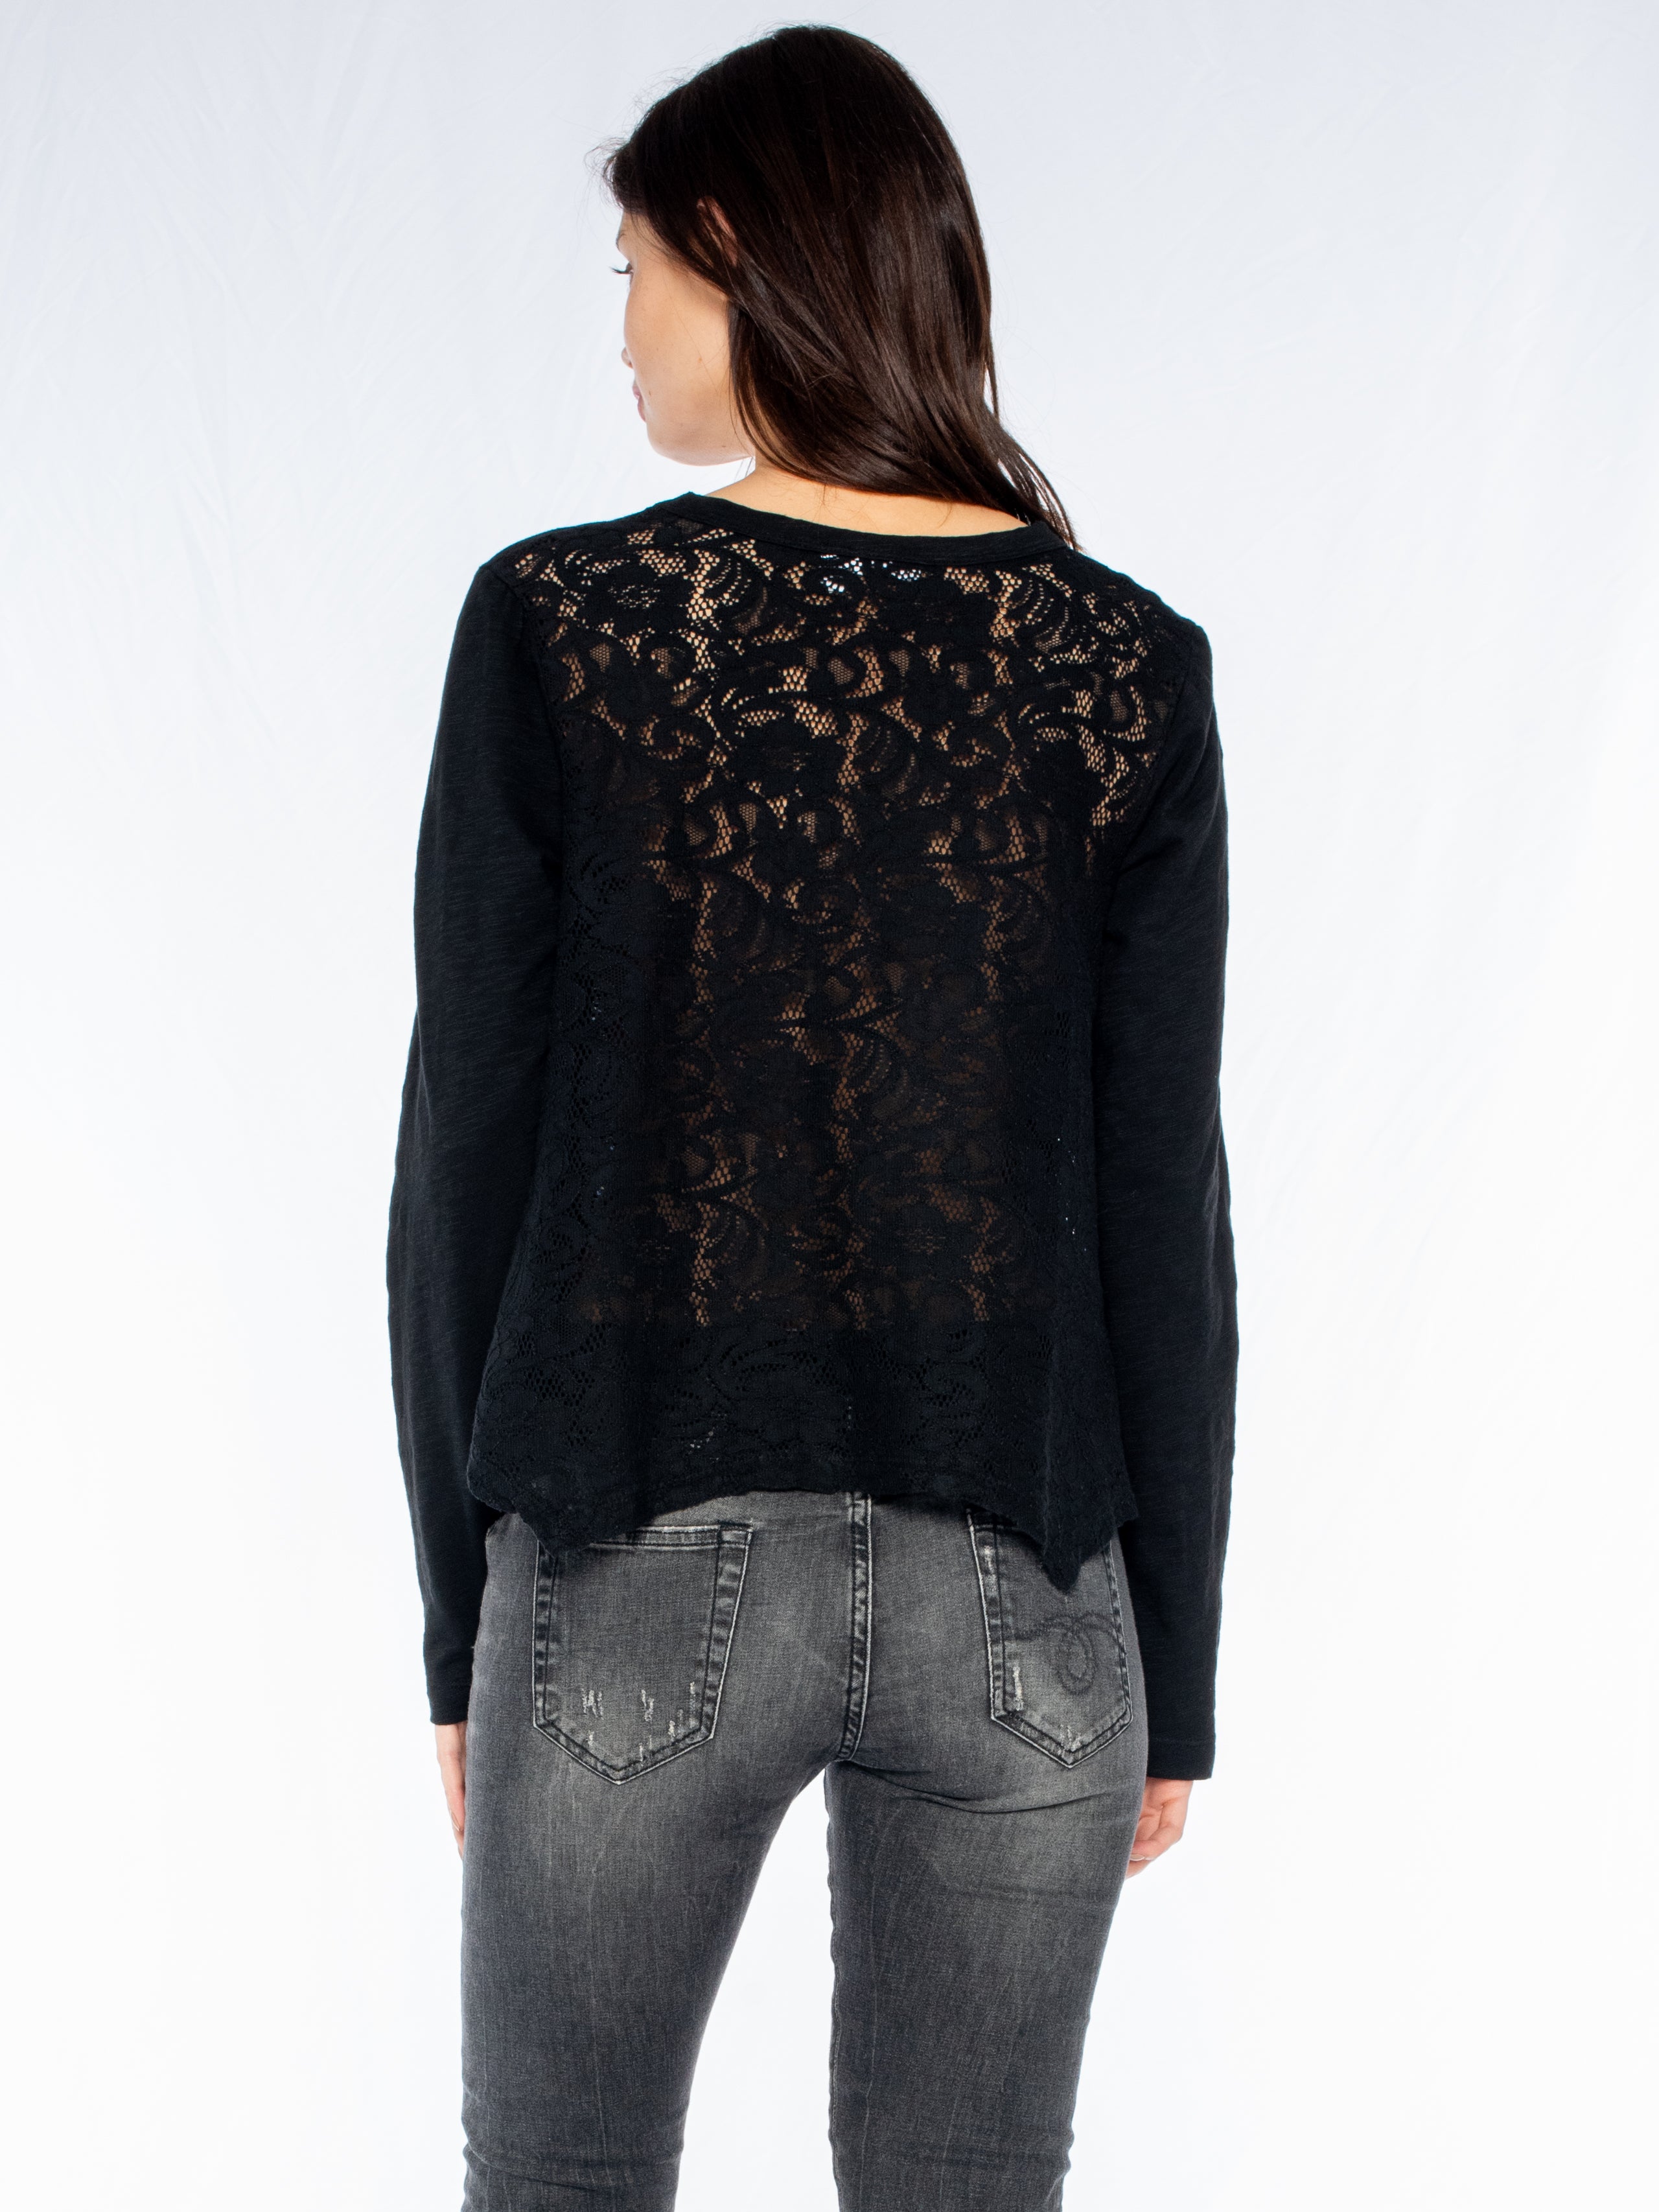 Scoopy Neck Shrunken BF L/S Tee Lace Back